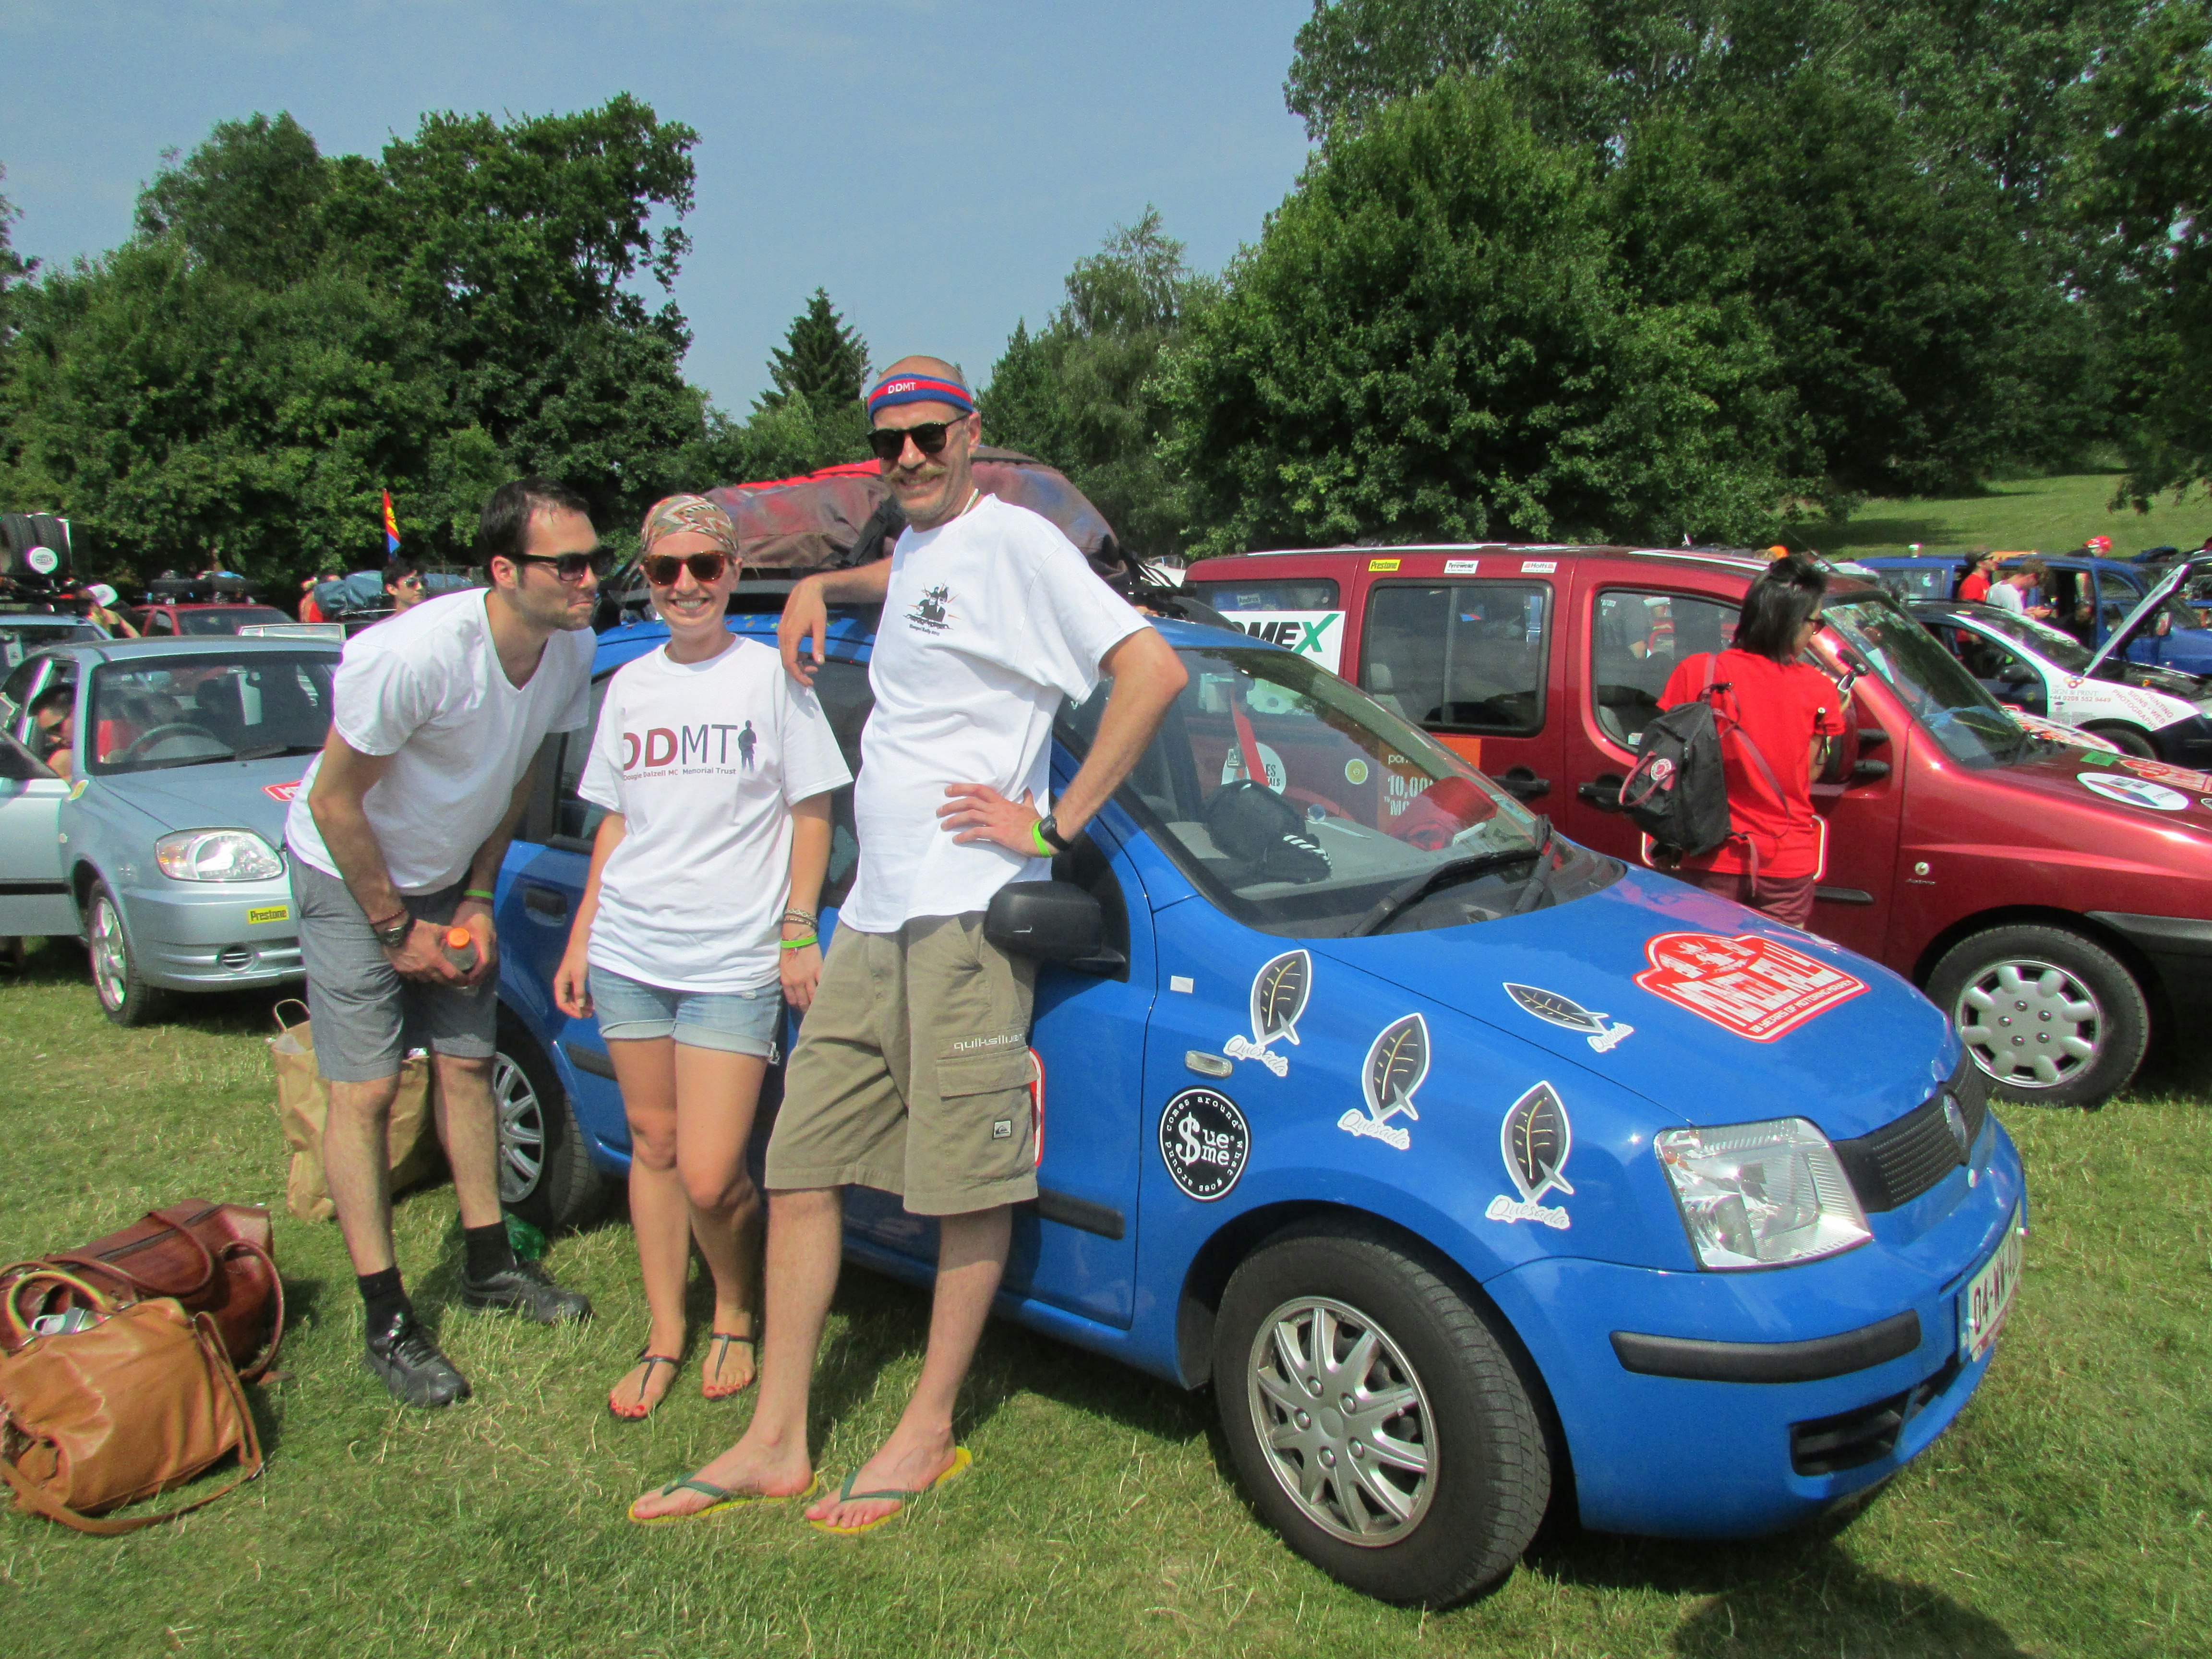 Two men and a woman in matching white Mongol Rally t-shirts and black wayfarer sunglasses stand in front of a blue European minivan covered in stickers at the starting line of the race